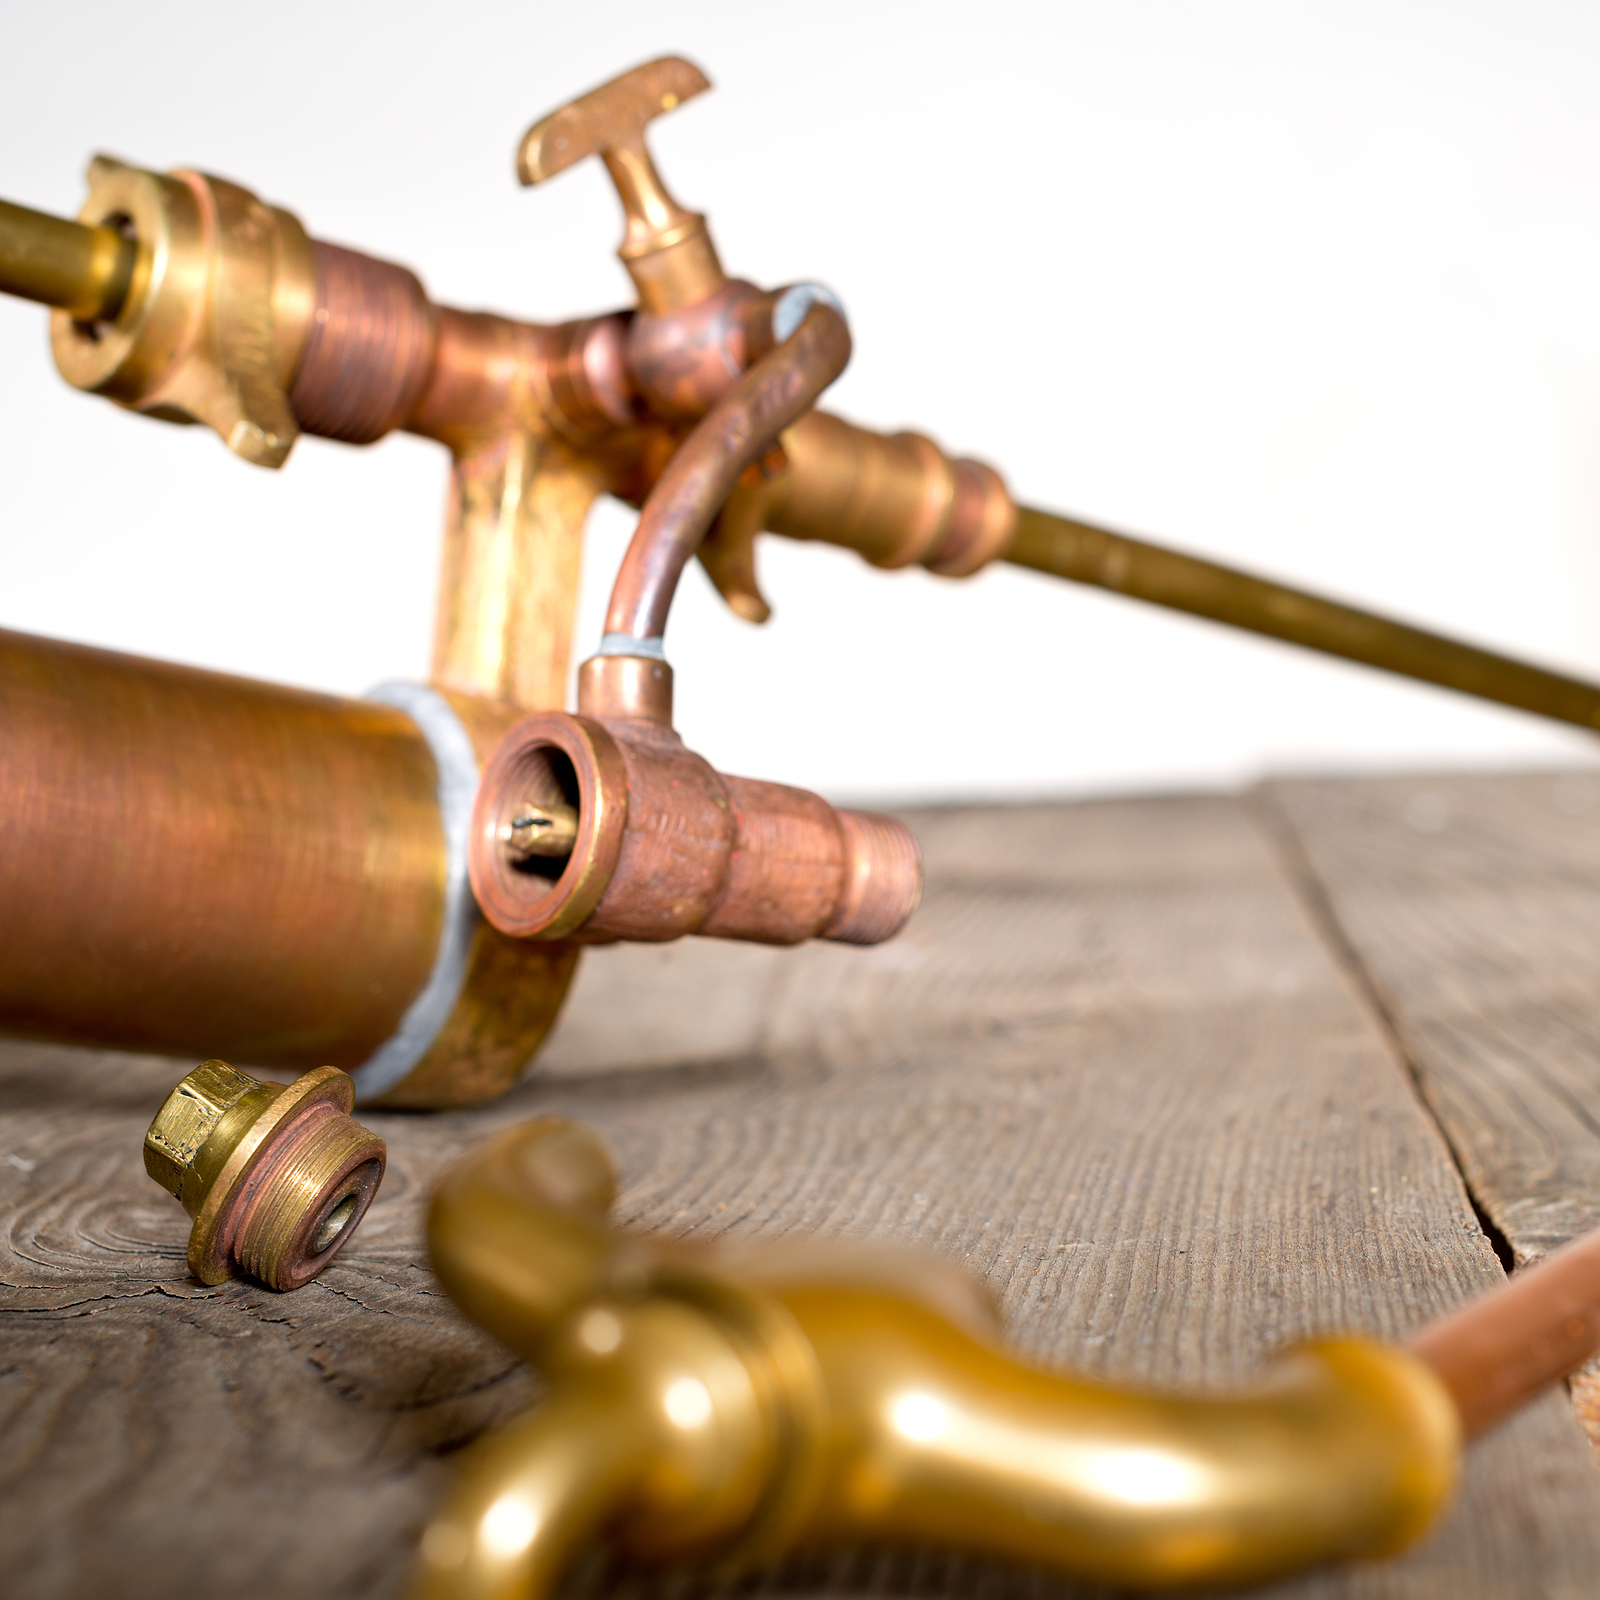 Why Contractors Prefer Brass Tube for Plumbing and Heating Fixtures